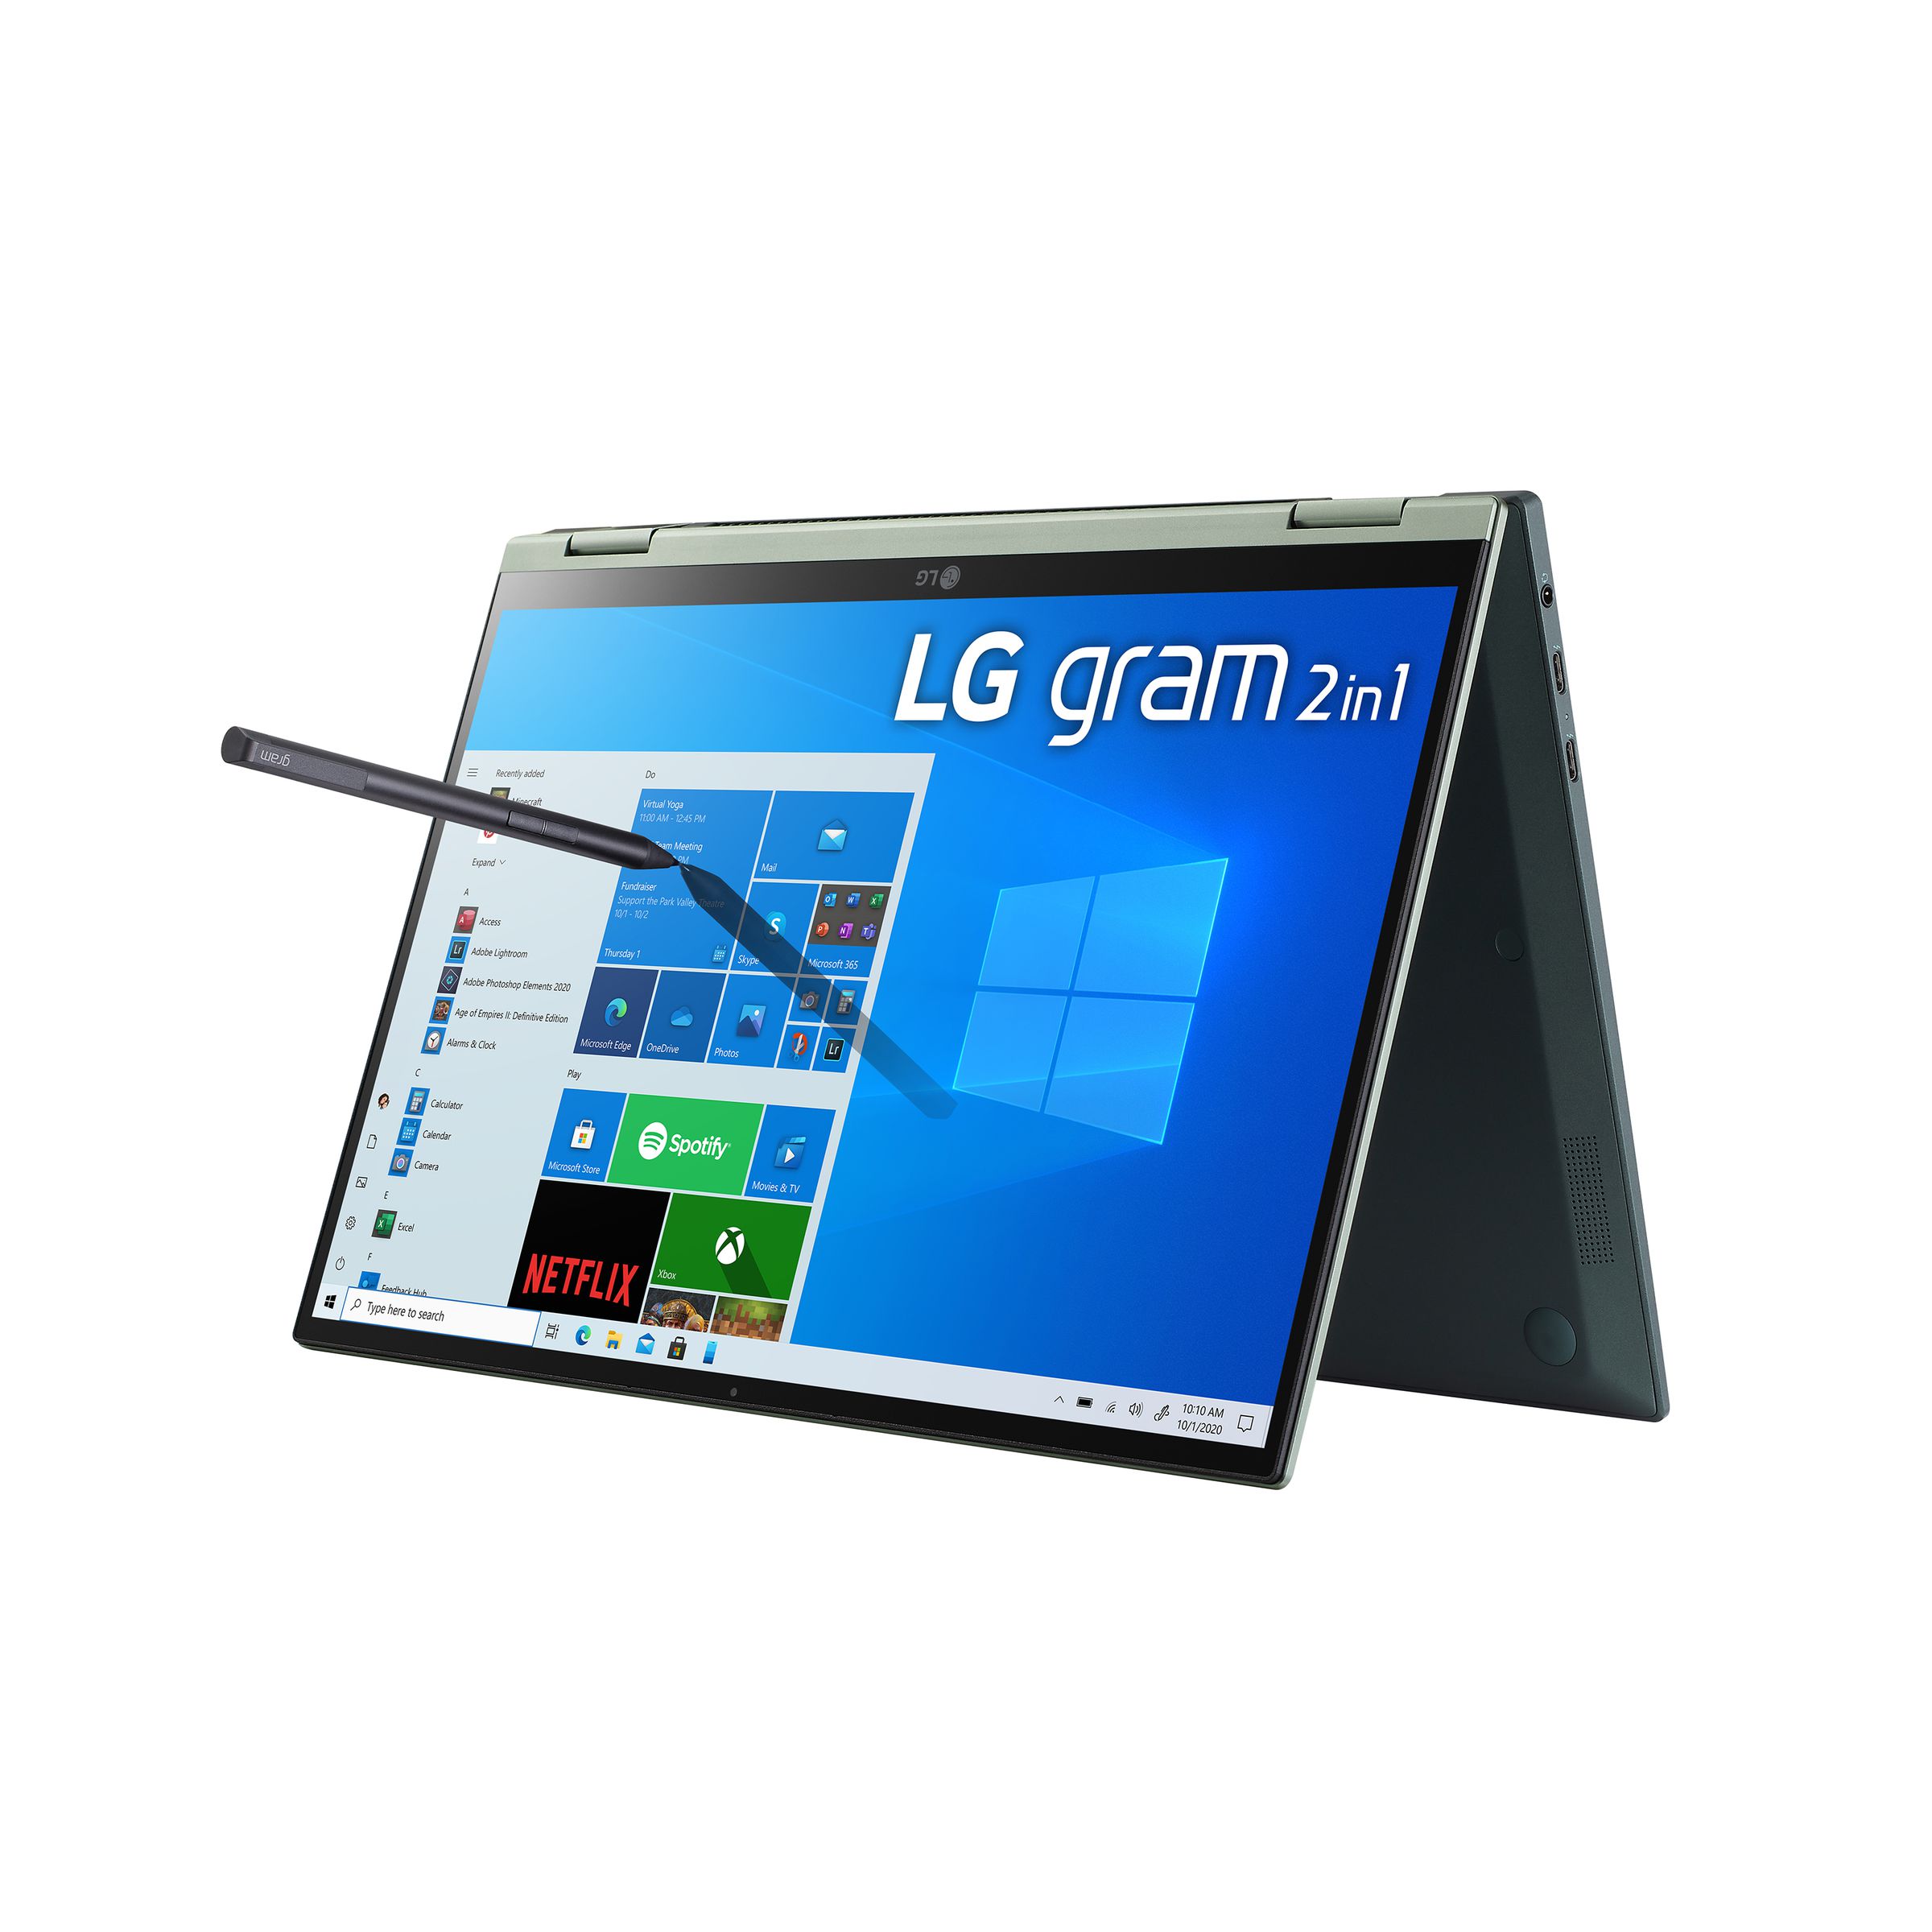 The 14-inch LG Gram 2-in-1 standing in tent mode, angled to the left. The start menu is open; a stylus appears to press one of its icons.